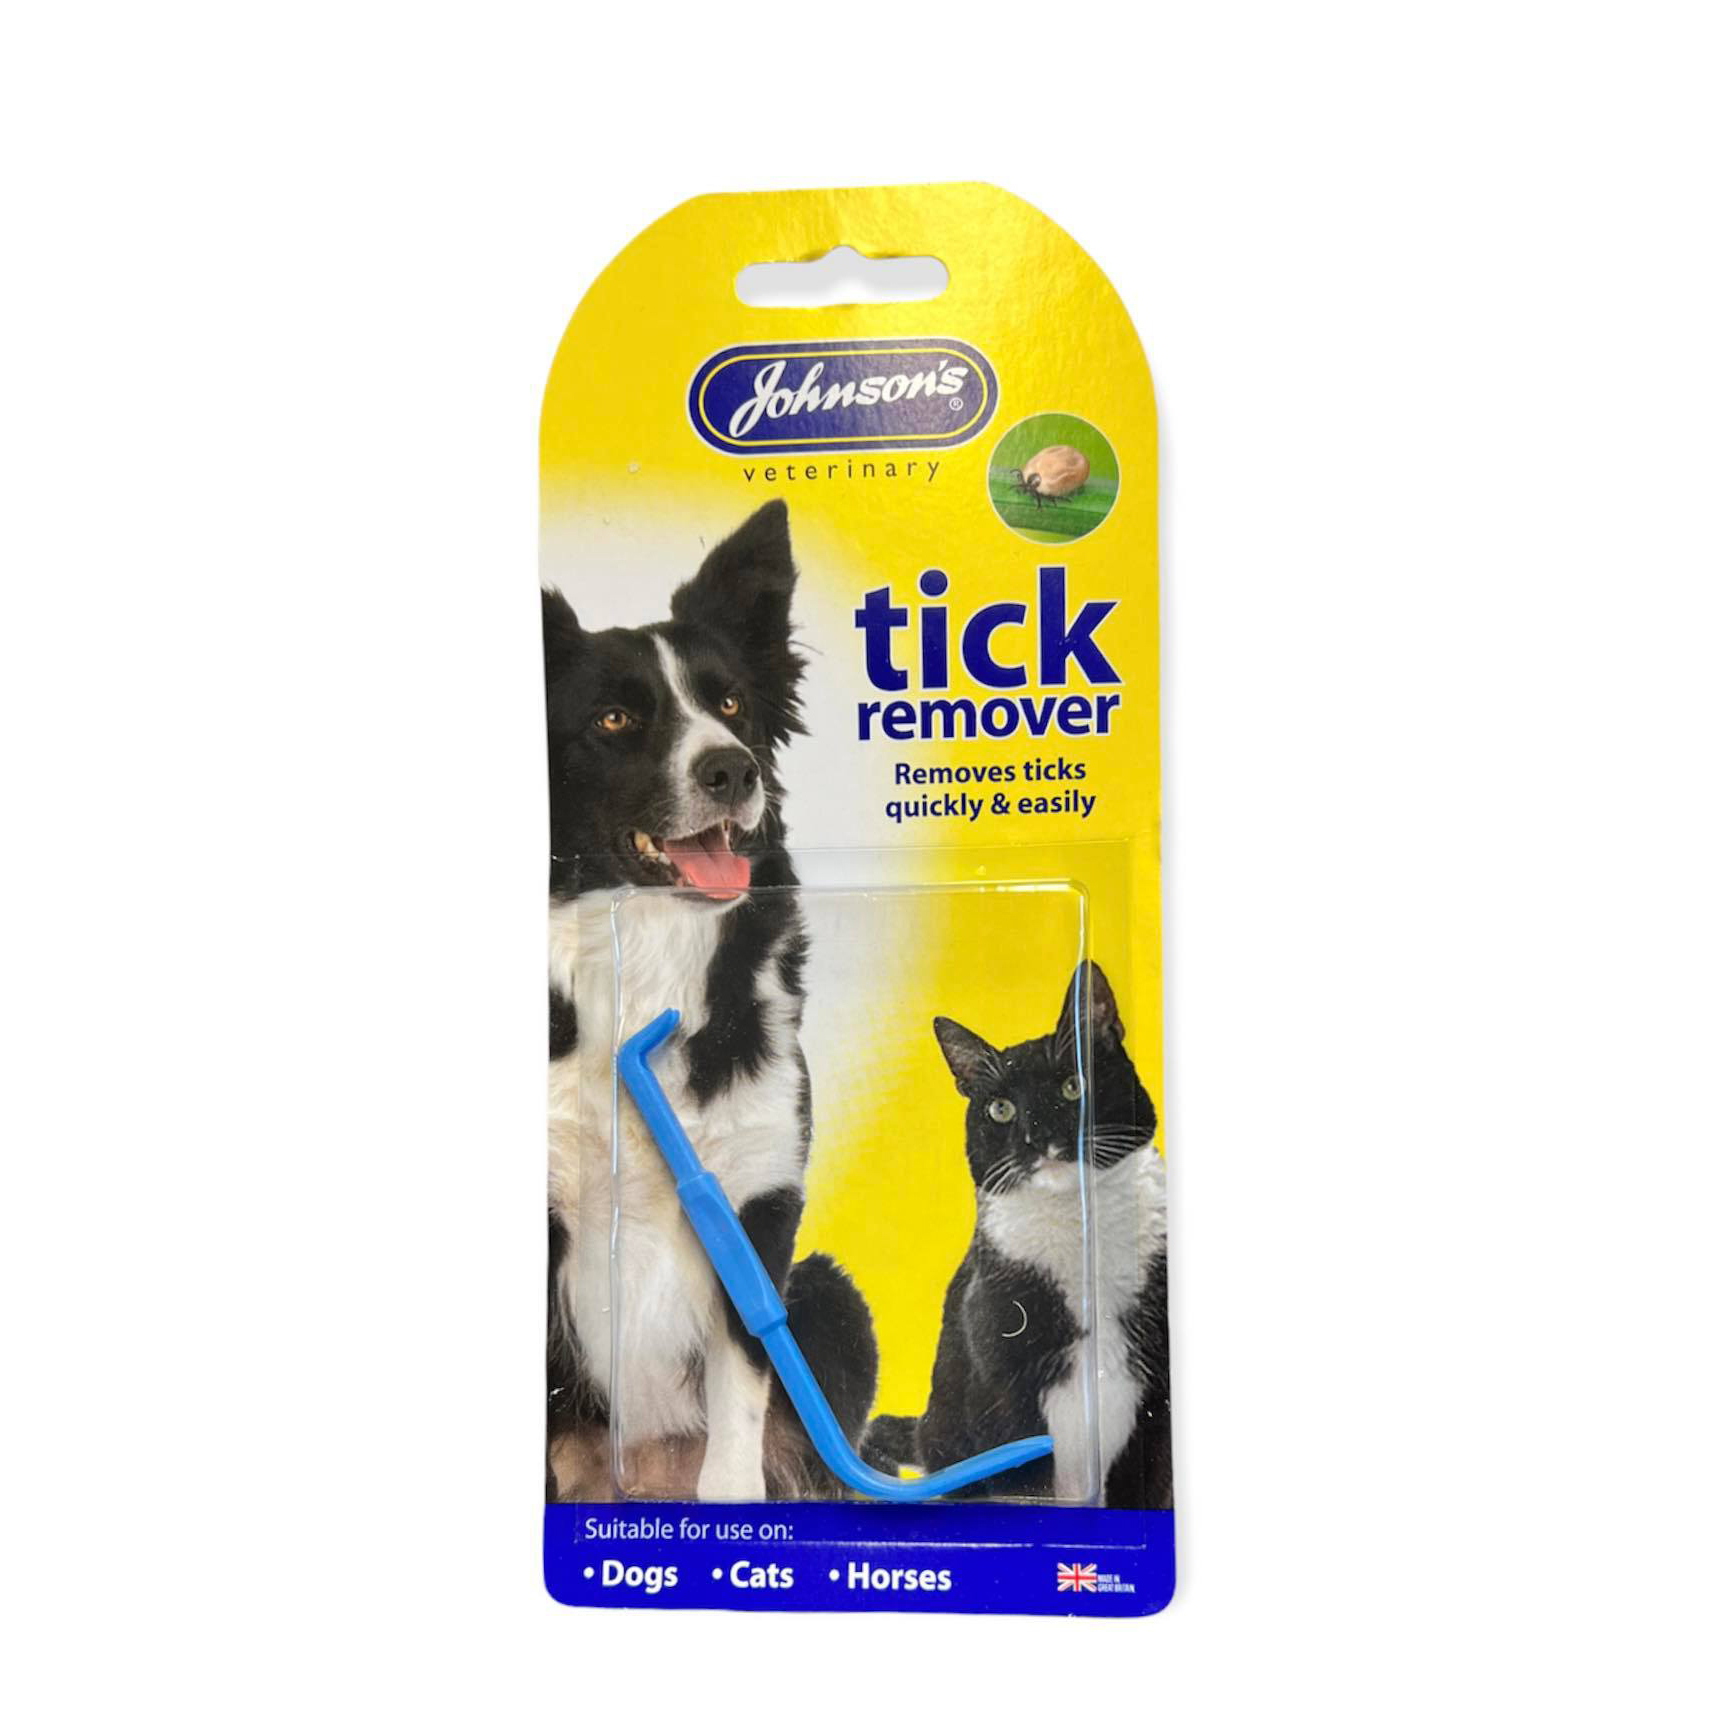 Johnstons Tick Remover